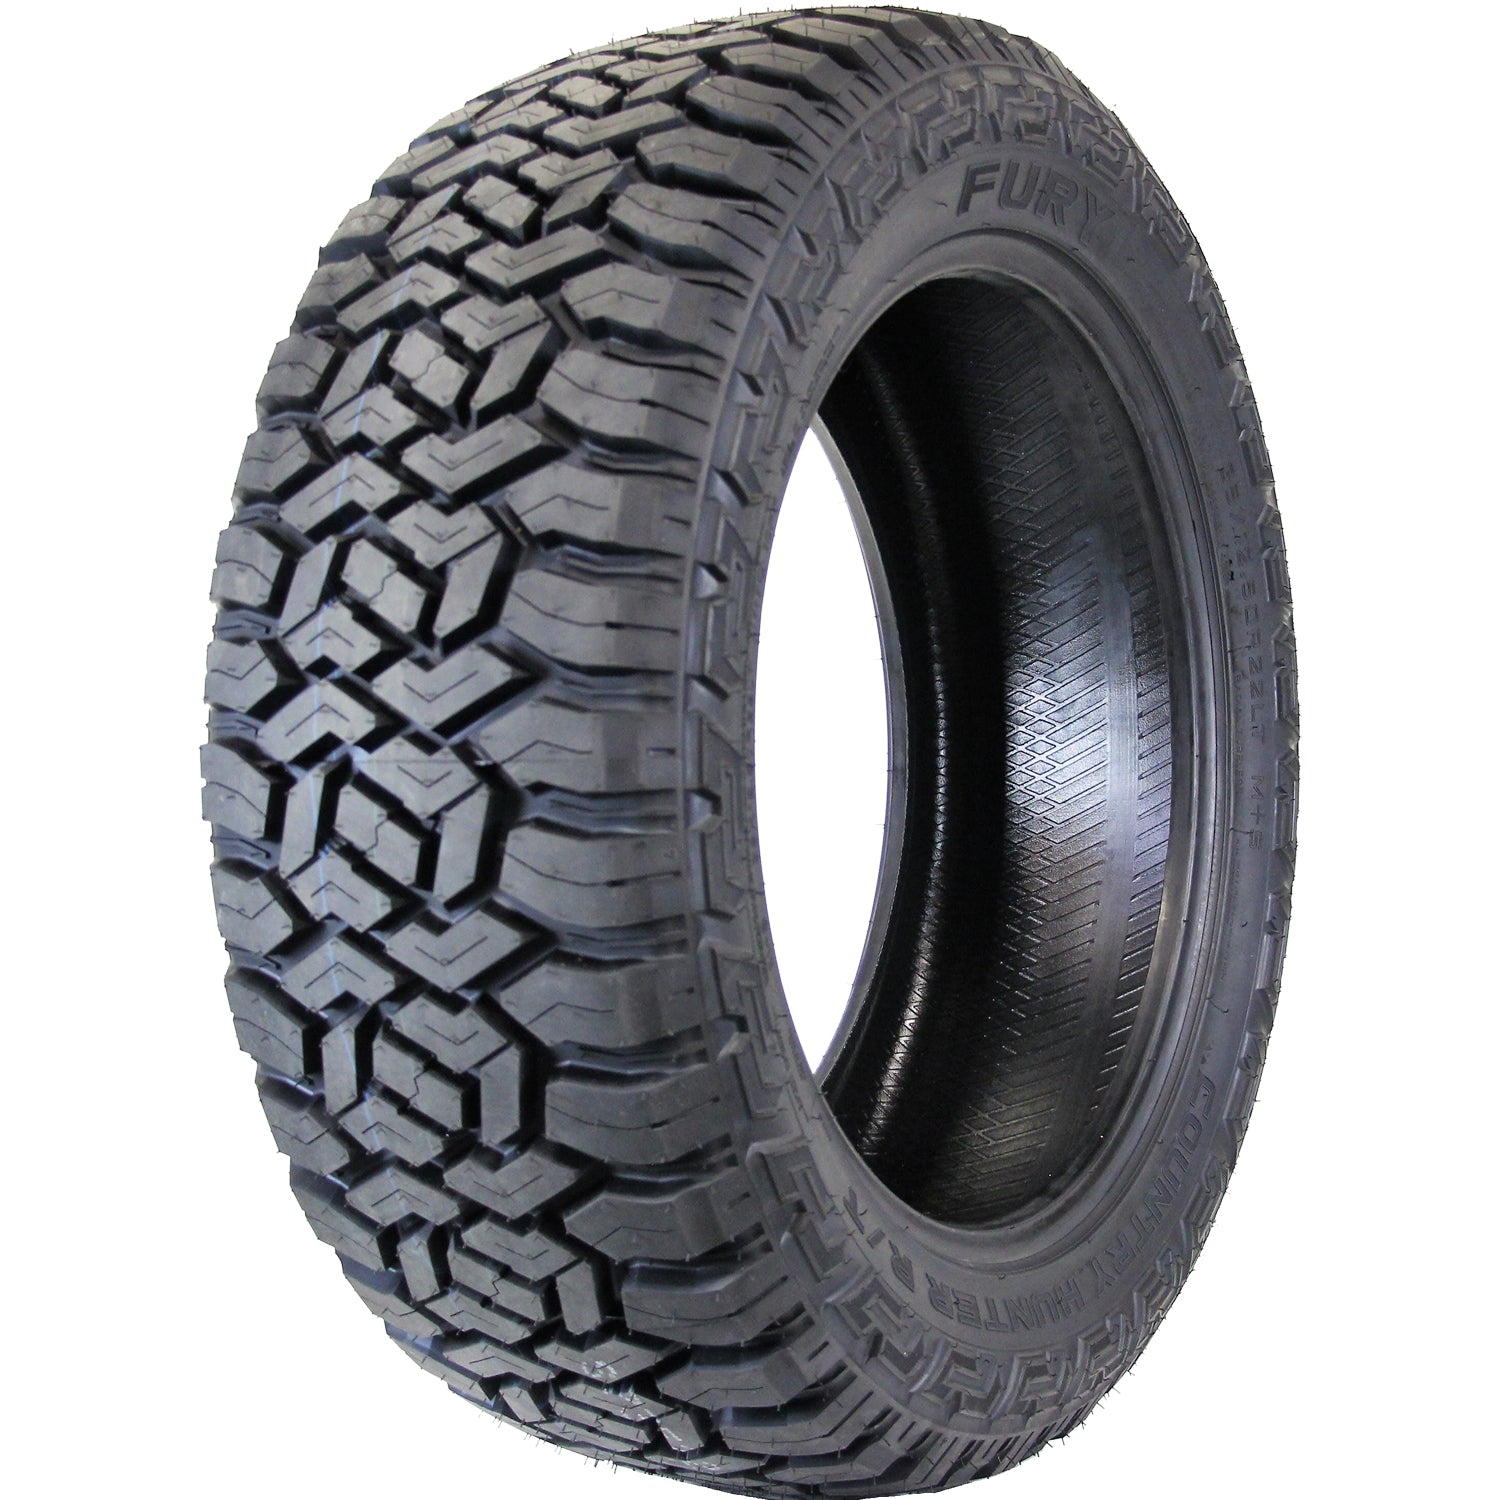 FURY OFFROAD COUNTRY HUNTER RT 35X12.50R22LT Tires